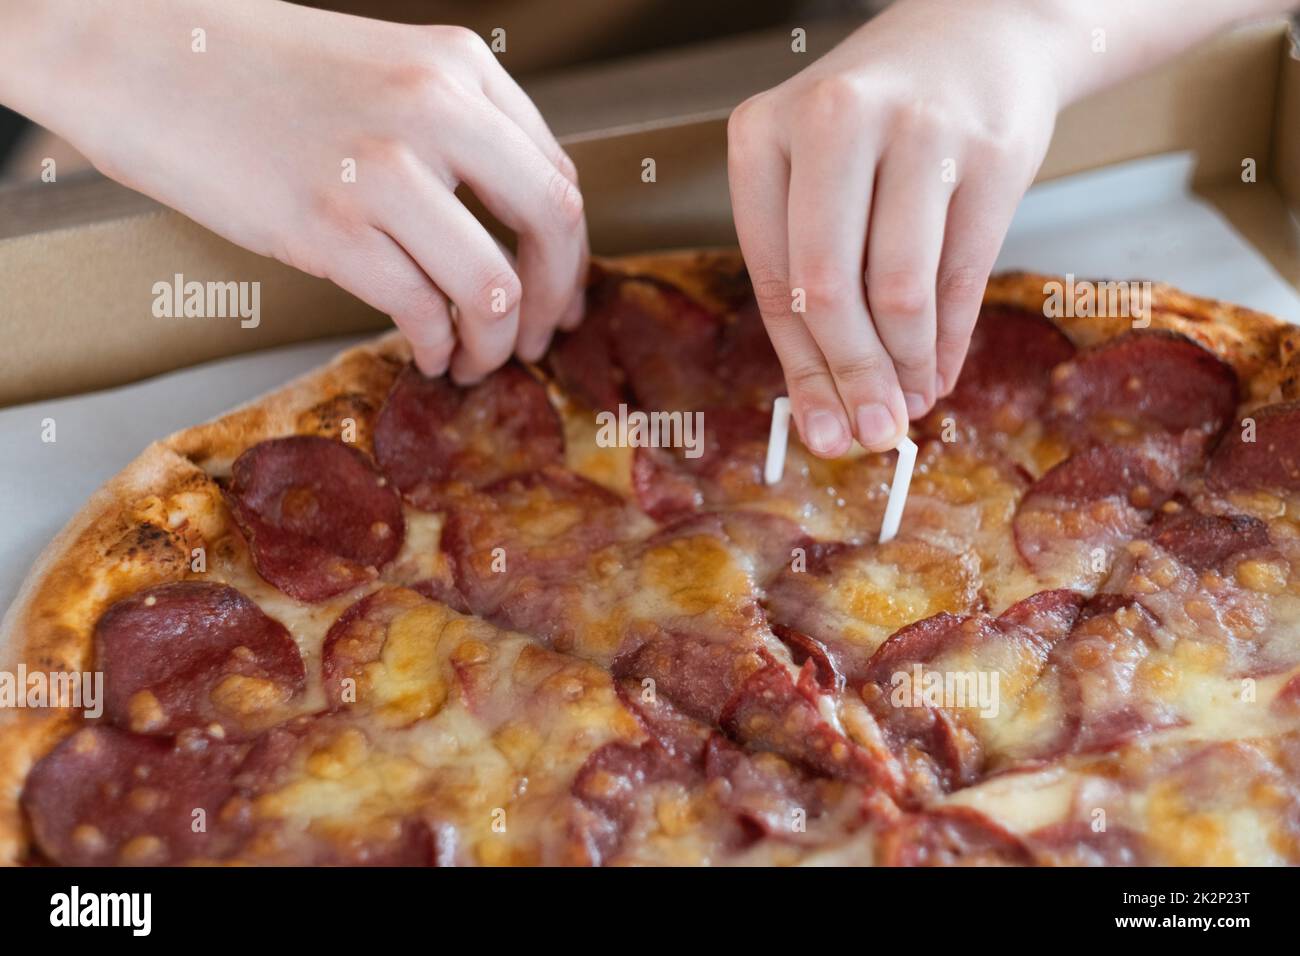 Closeup Of A Mans Hand Taking A Slice Of Pepperoni Pizza Pizza With